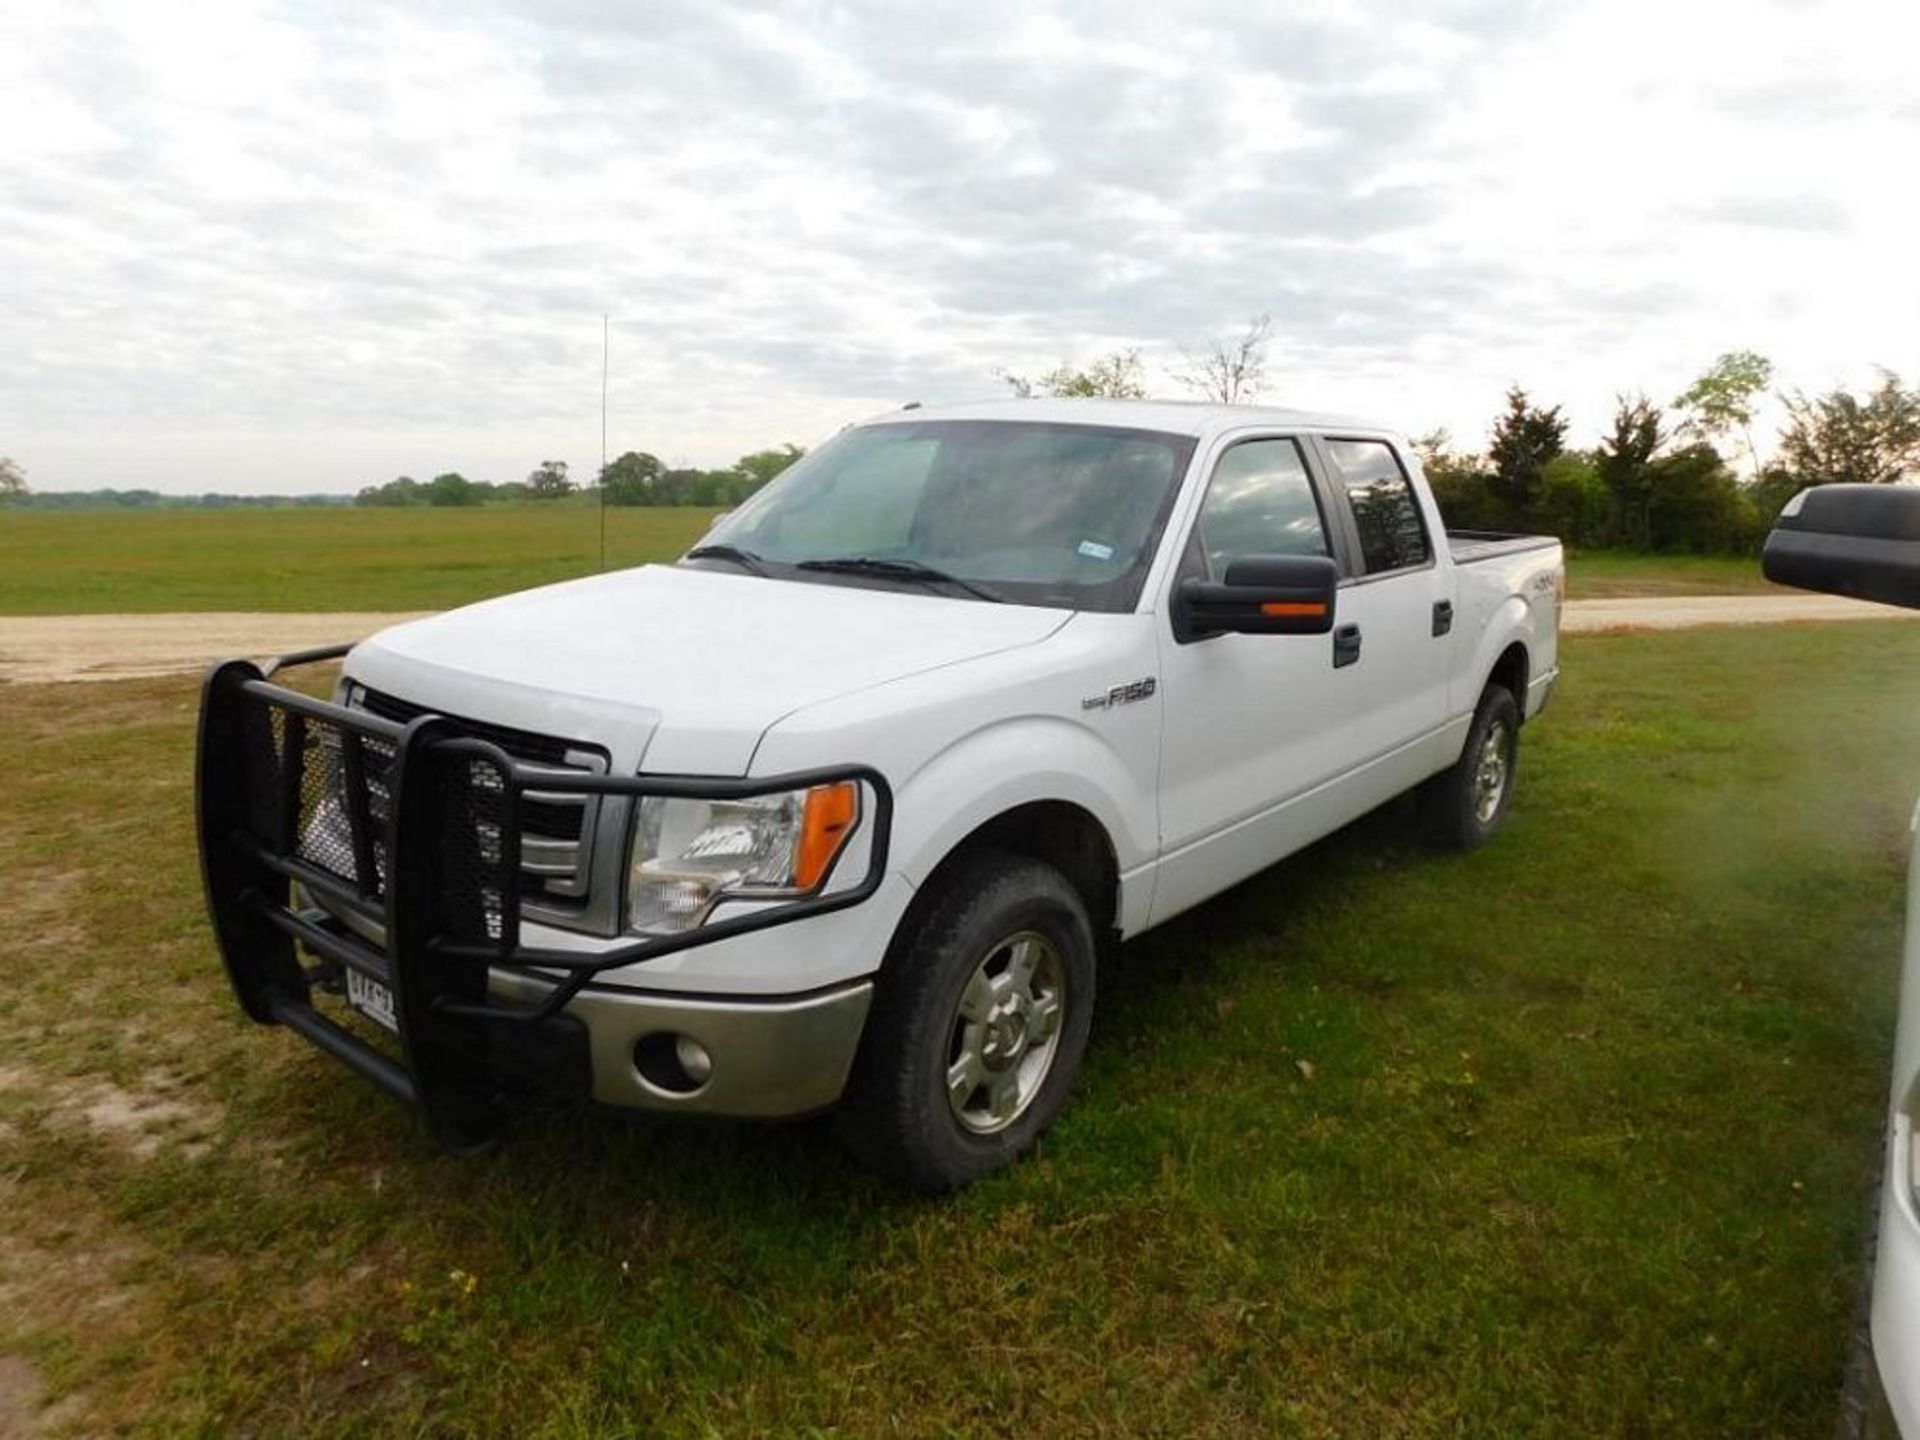 2013 Ford F-150 XLT 4x4 Crew Cab Pick-up Truck, VIN 1FTFW1EF4DFB20236, 5-1/2 ft. Bed, 5.0 Liter Gaso - Image 2 of 4